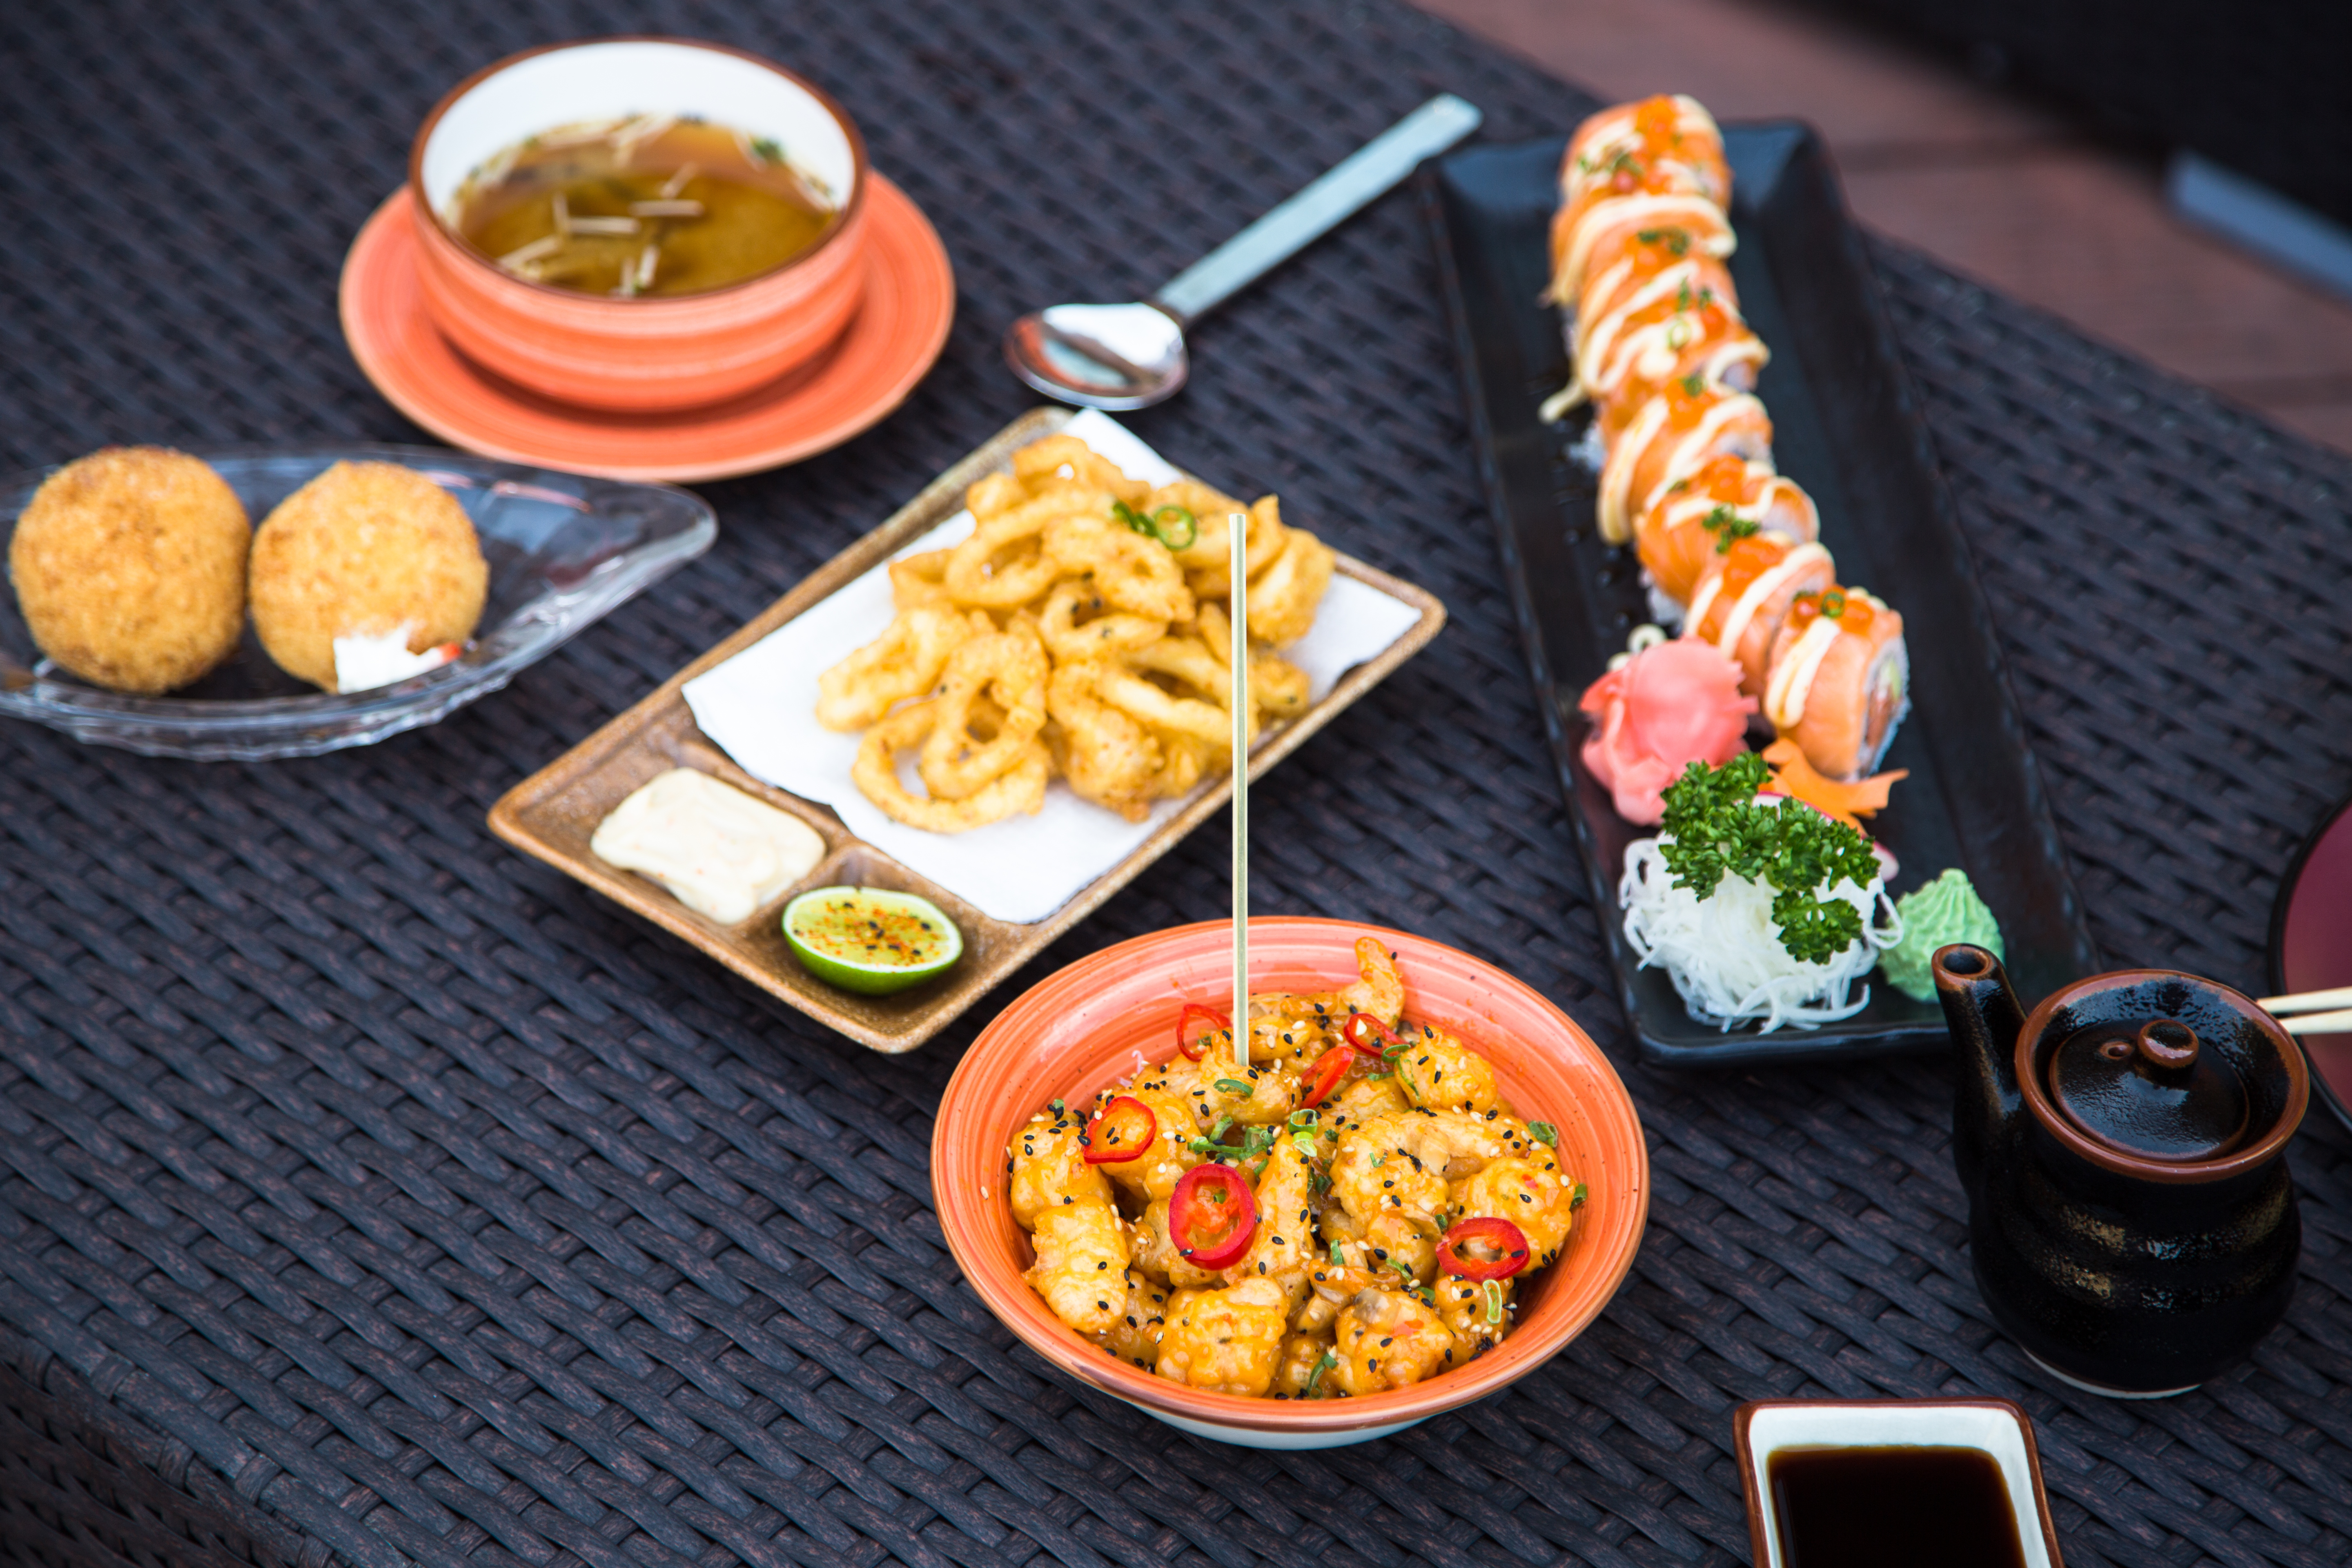 Oman dining: Eat authentic Japanese food at The Oak